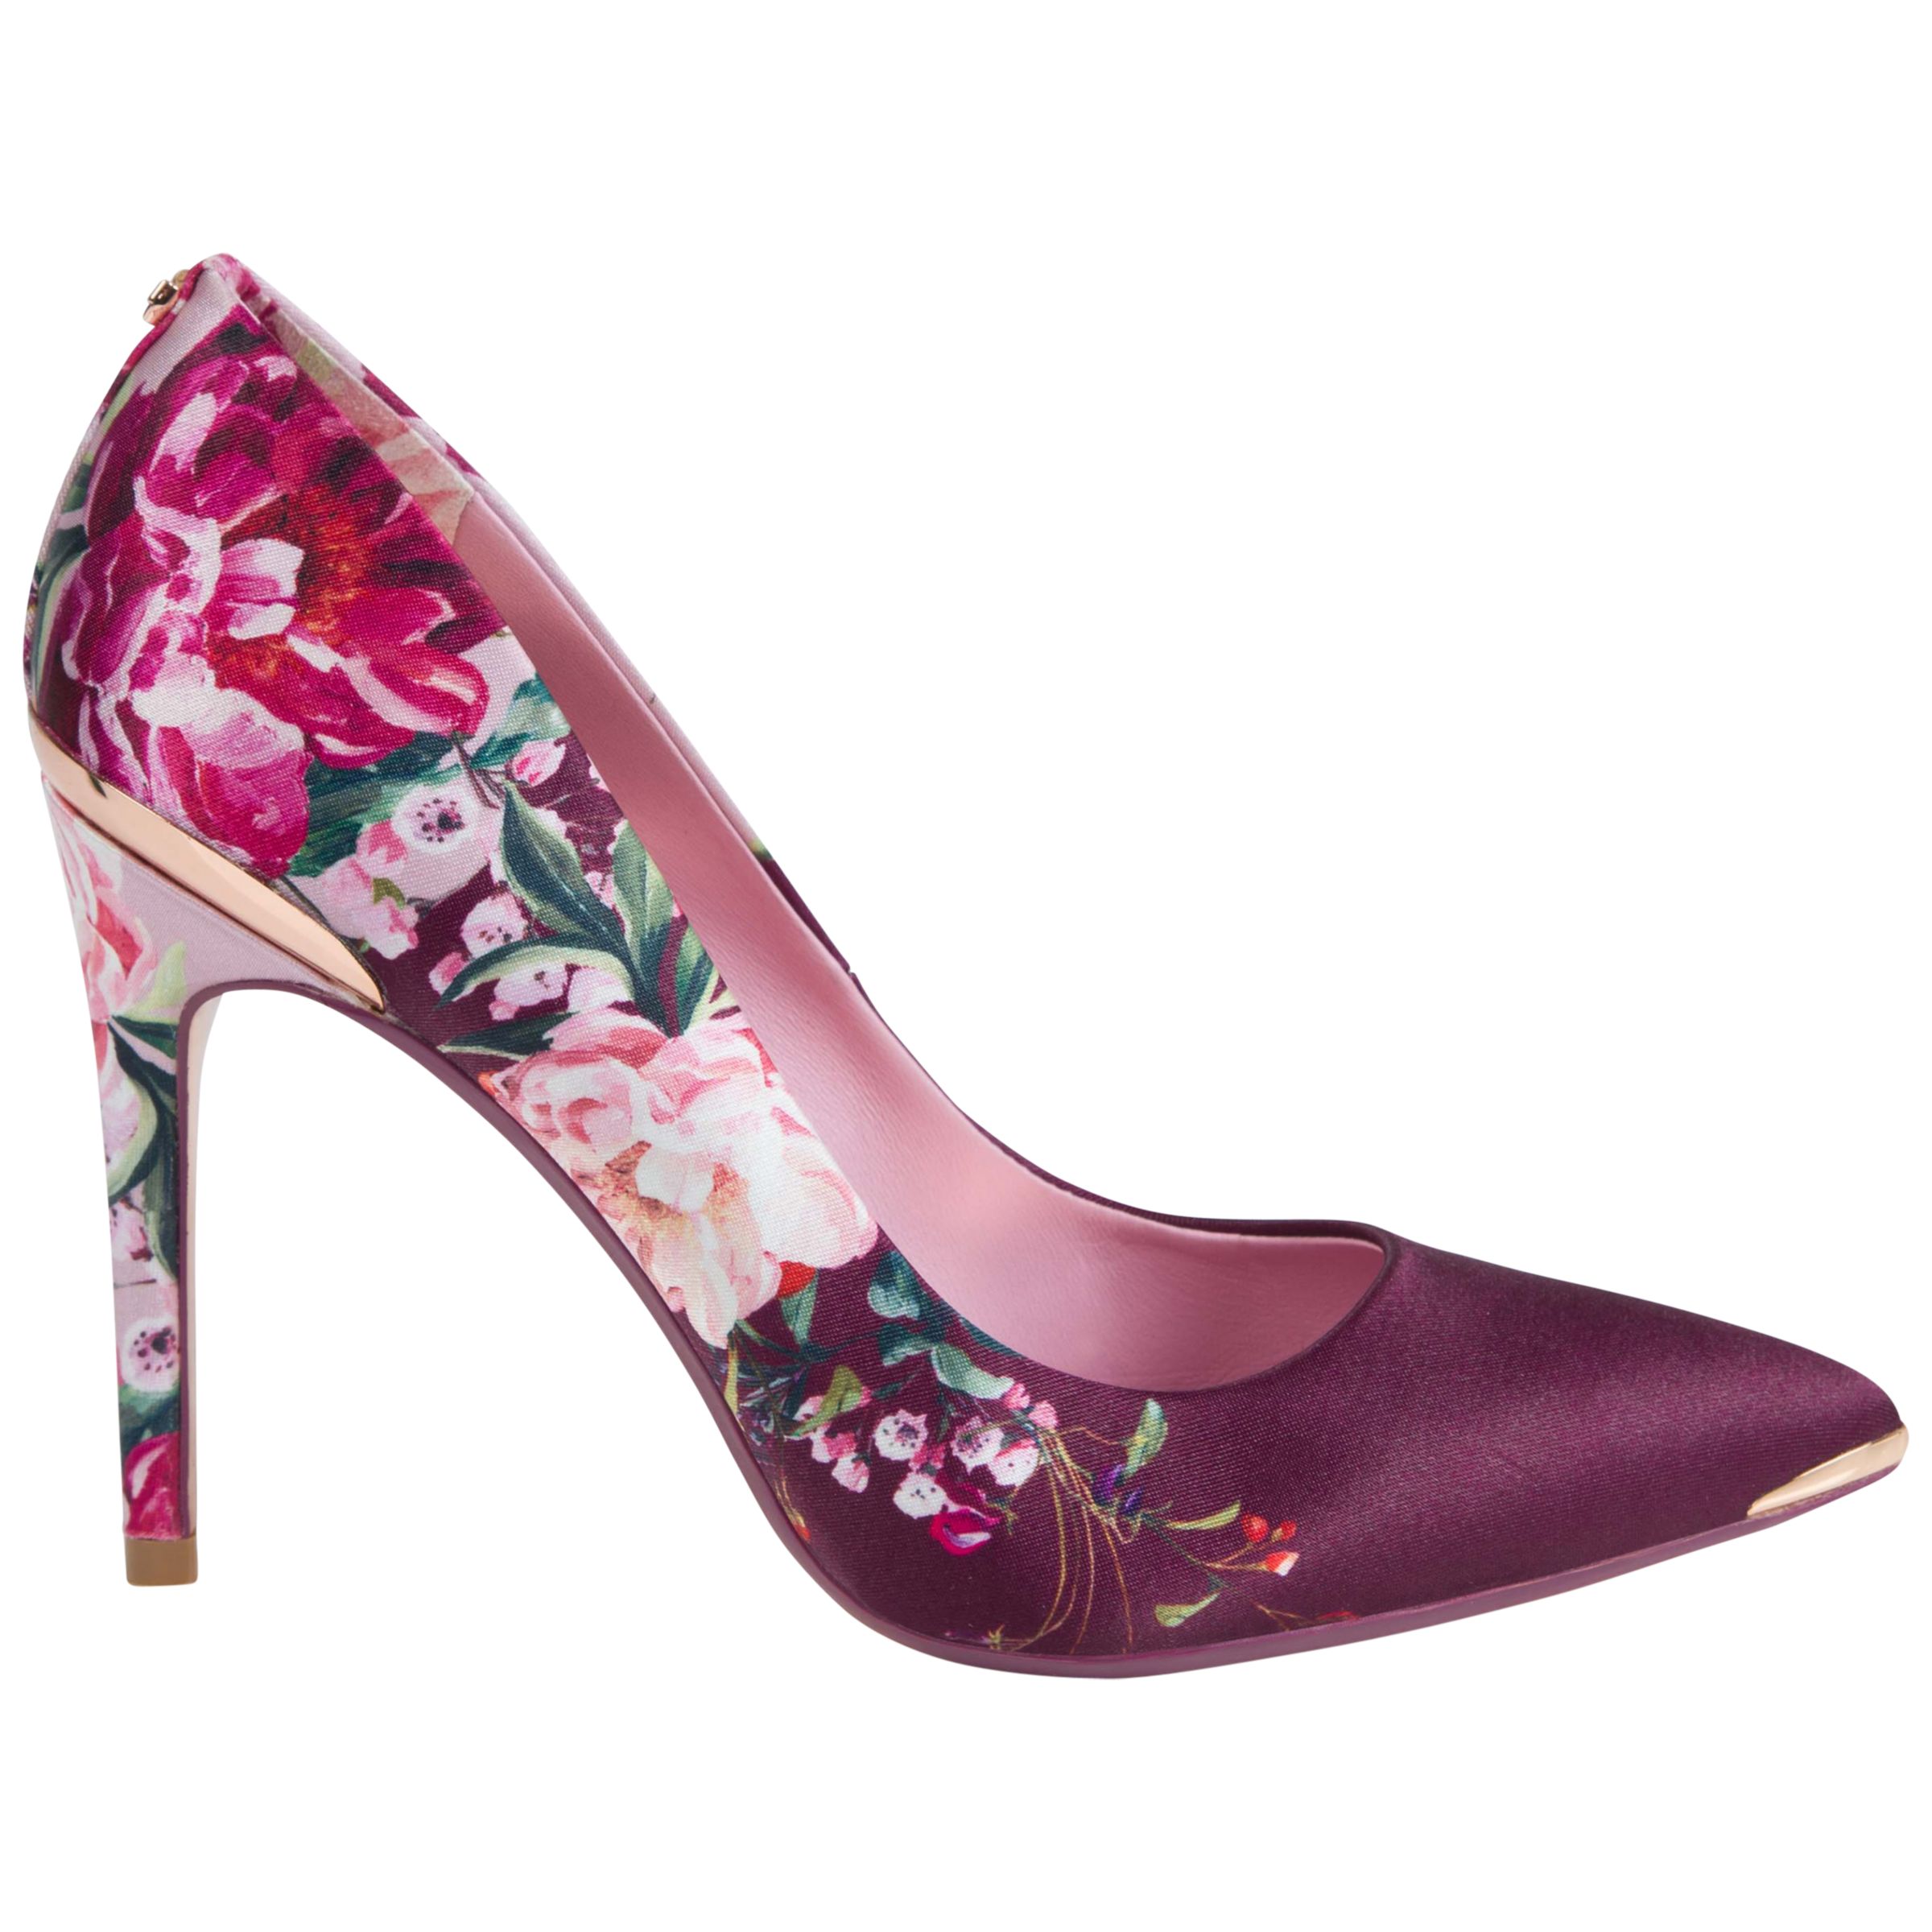 Ted Baker Kawaap Textile Heeled Court Shoes, Pink Multi